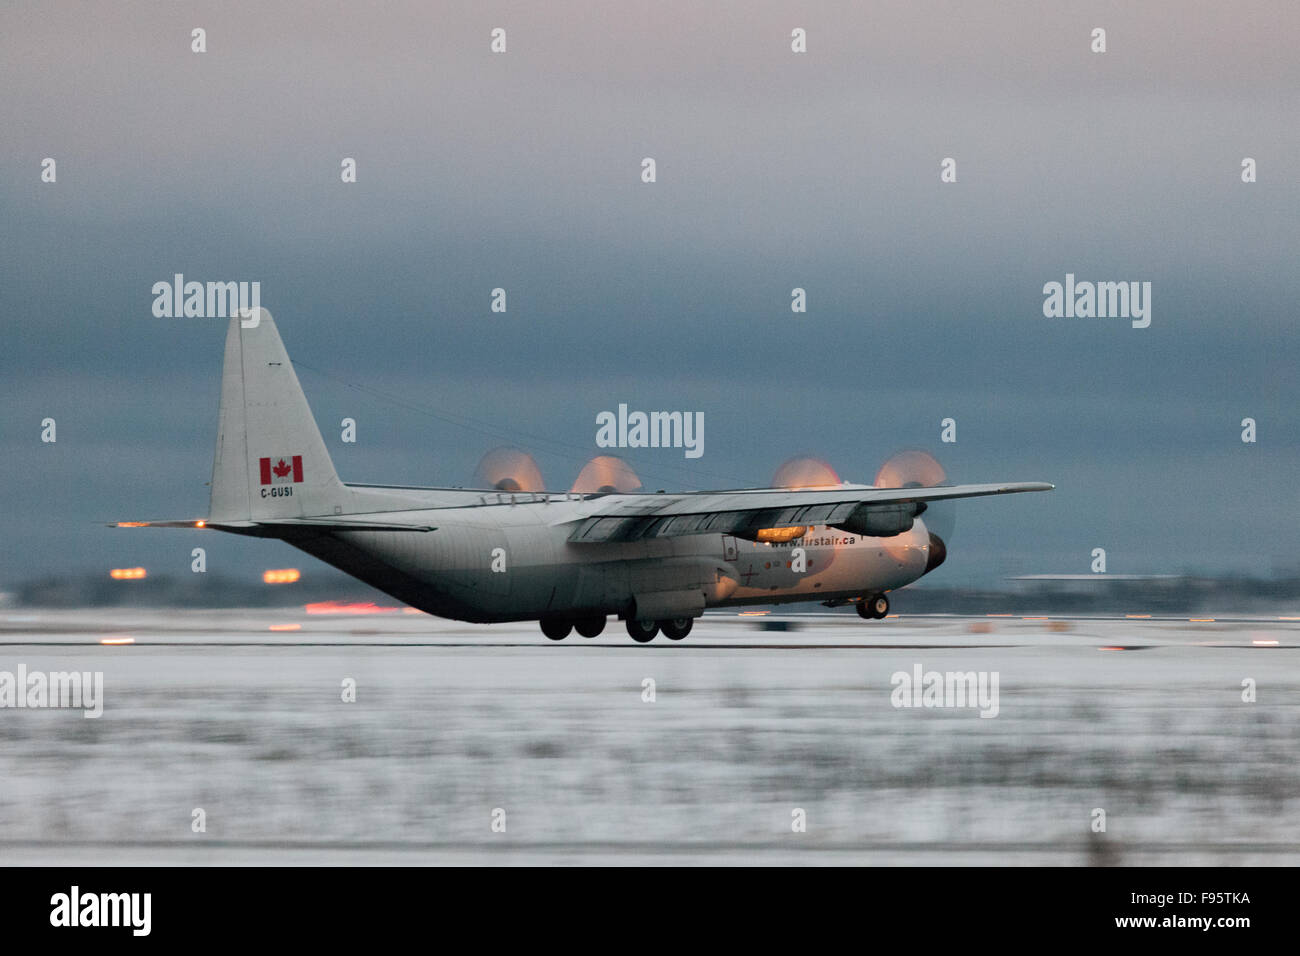 A First Air Hercules cargo plane lands at dusk in Yellowknife, Northwest Territories, Canada Stock Photo